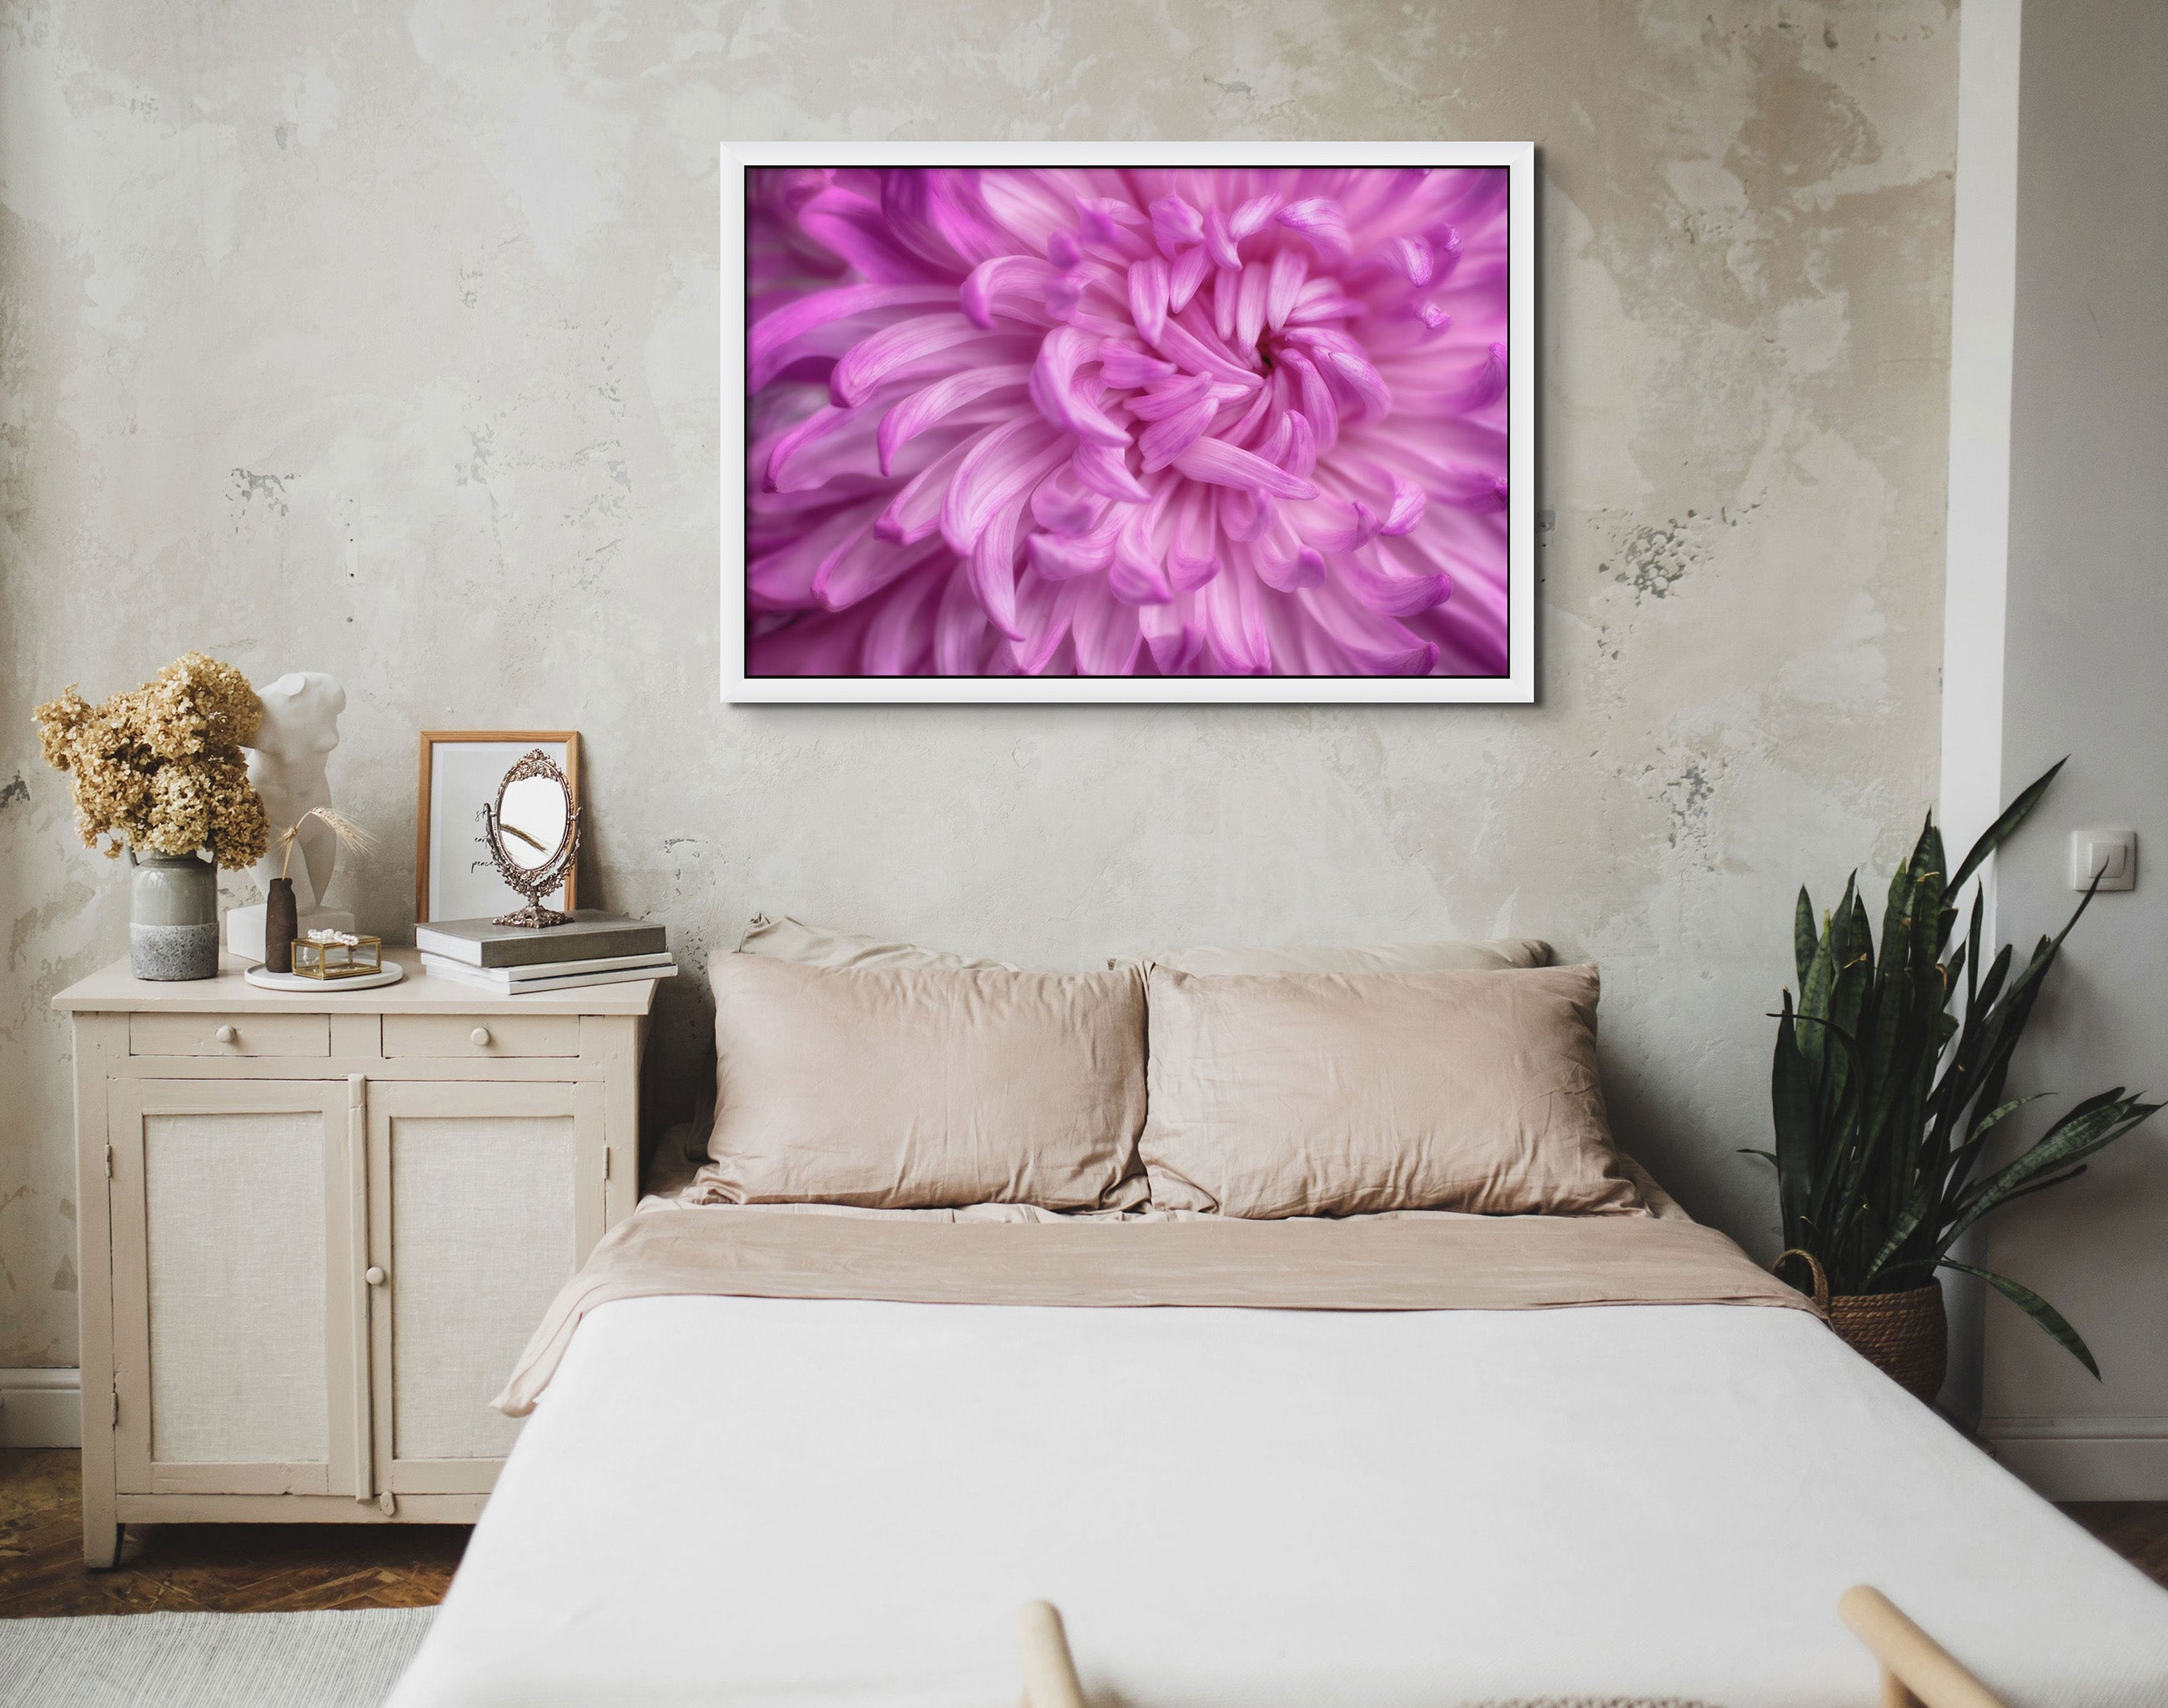 Picture hanging on the wall of a bedroom. The picture is a fine art photograph of a pink Chrysanthemum flower titled "Self Love" by Cameron Dreaux of Dreaux Fine Art. 